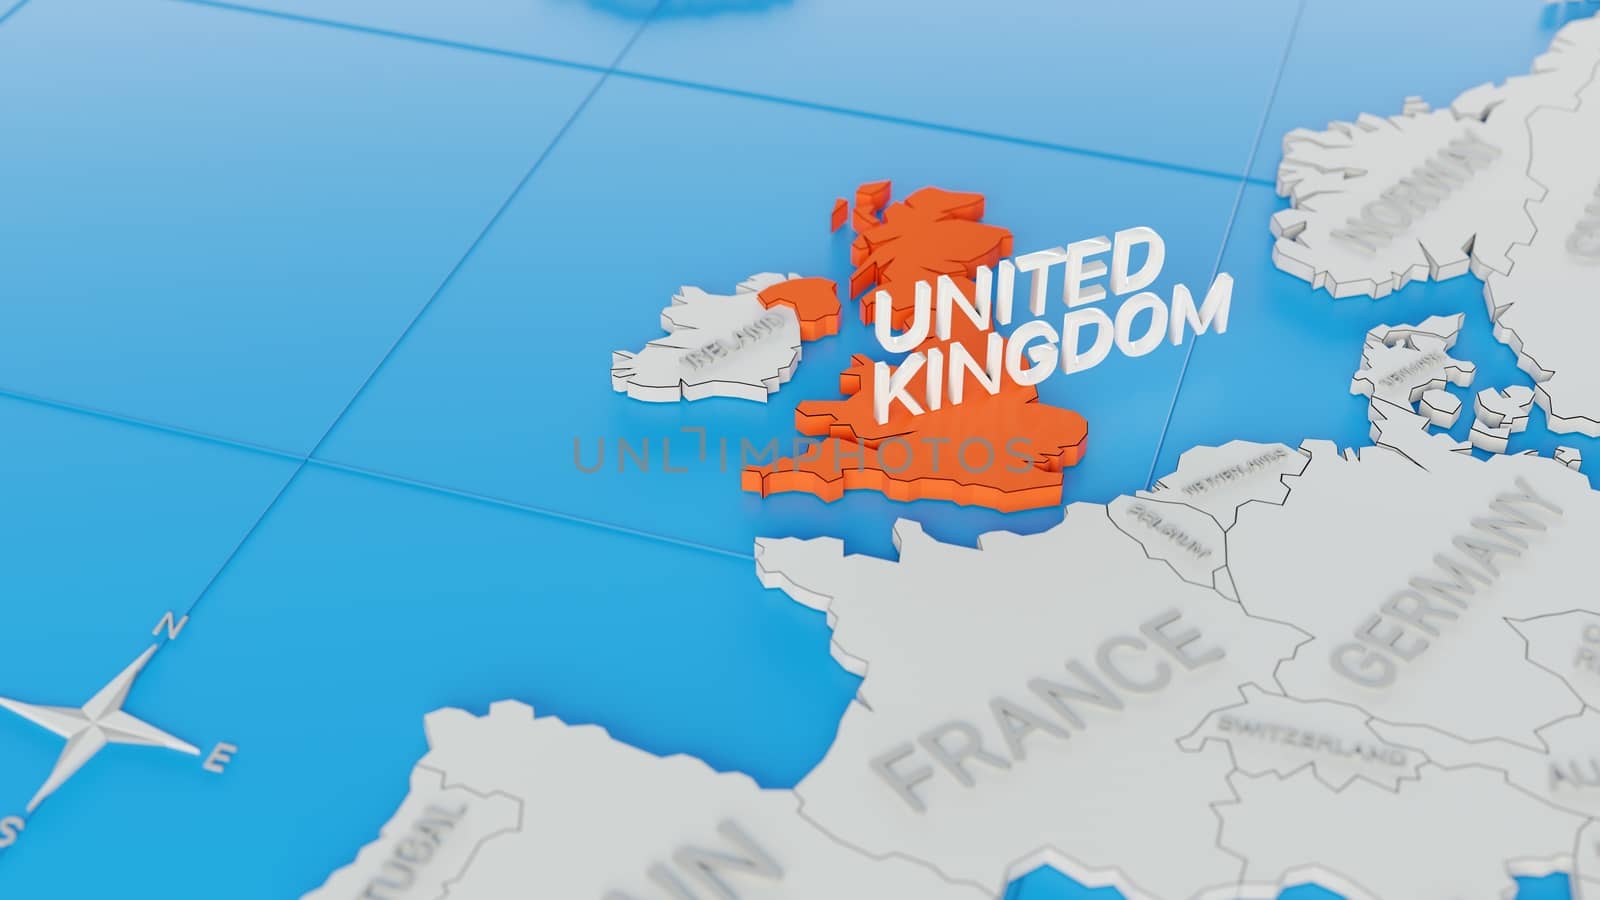 United Kingdom highlighted on a white simplified 3D world map. Digital 3D render.